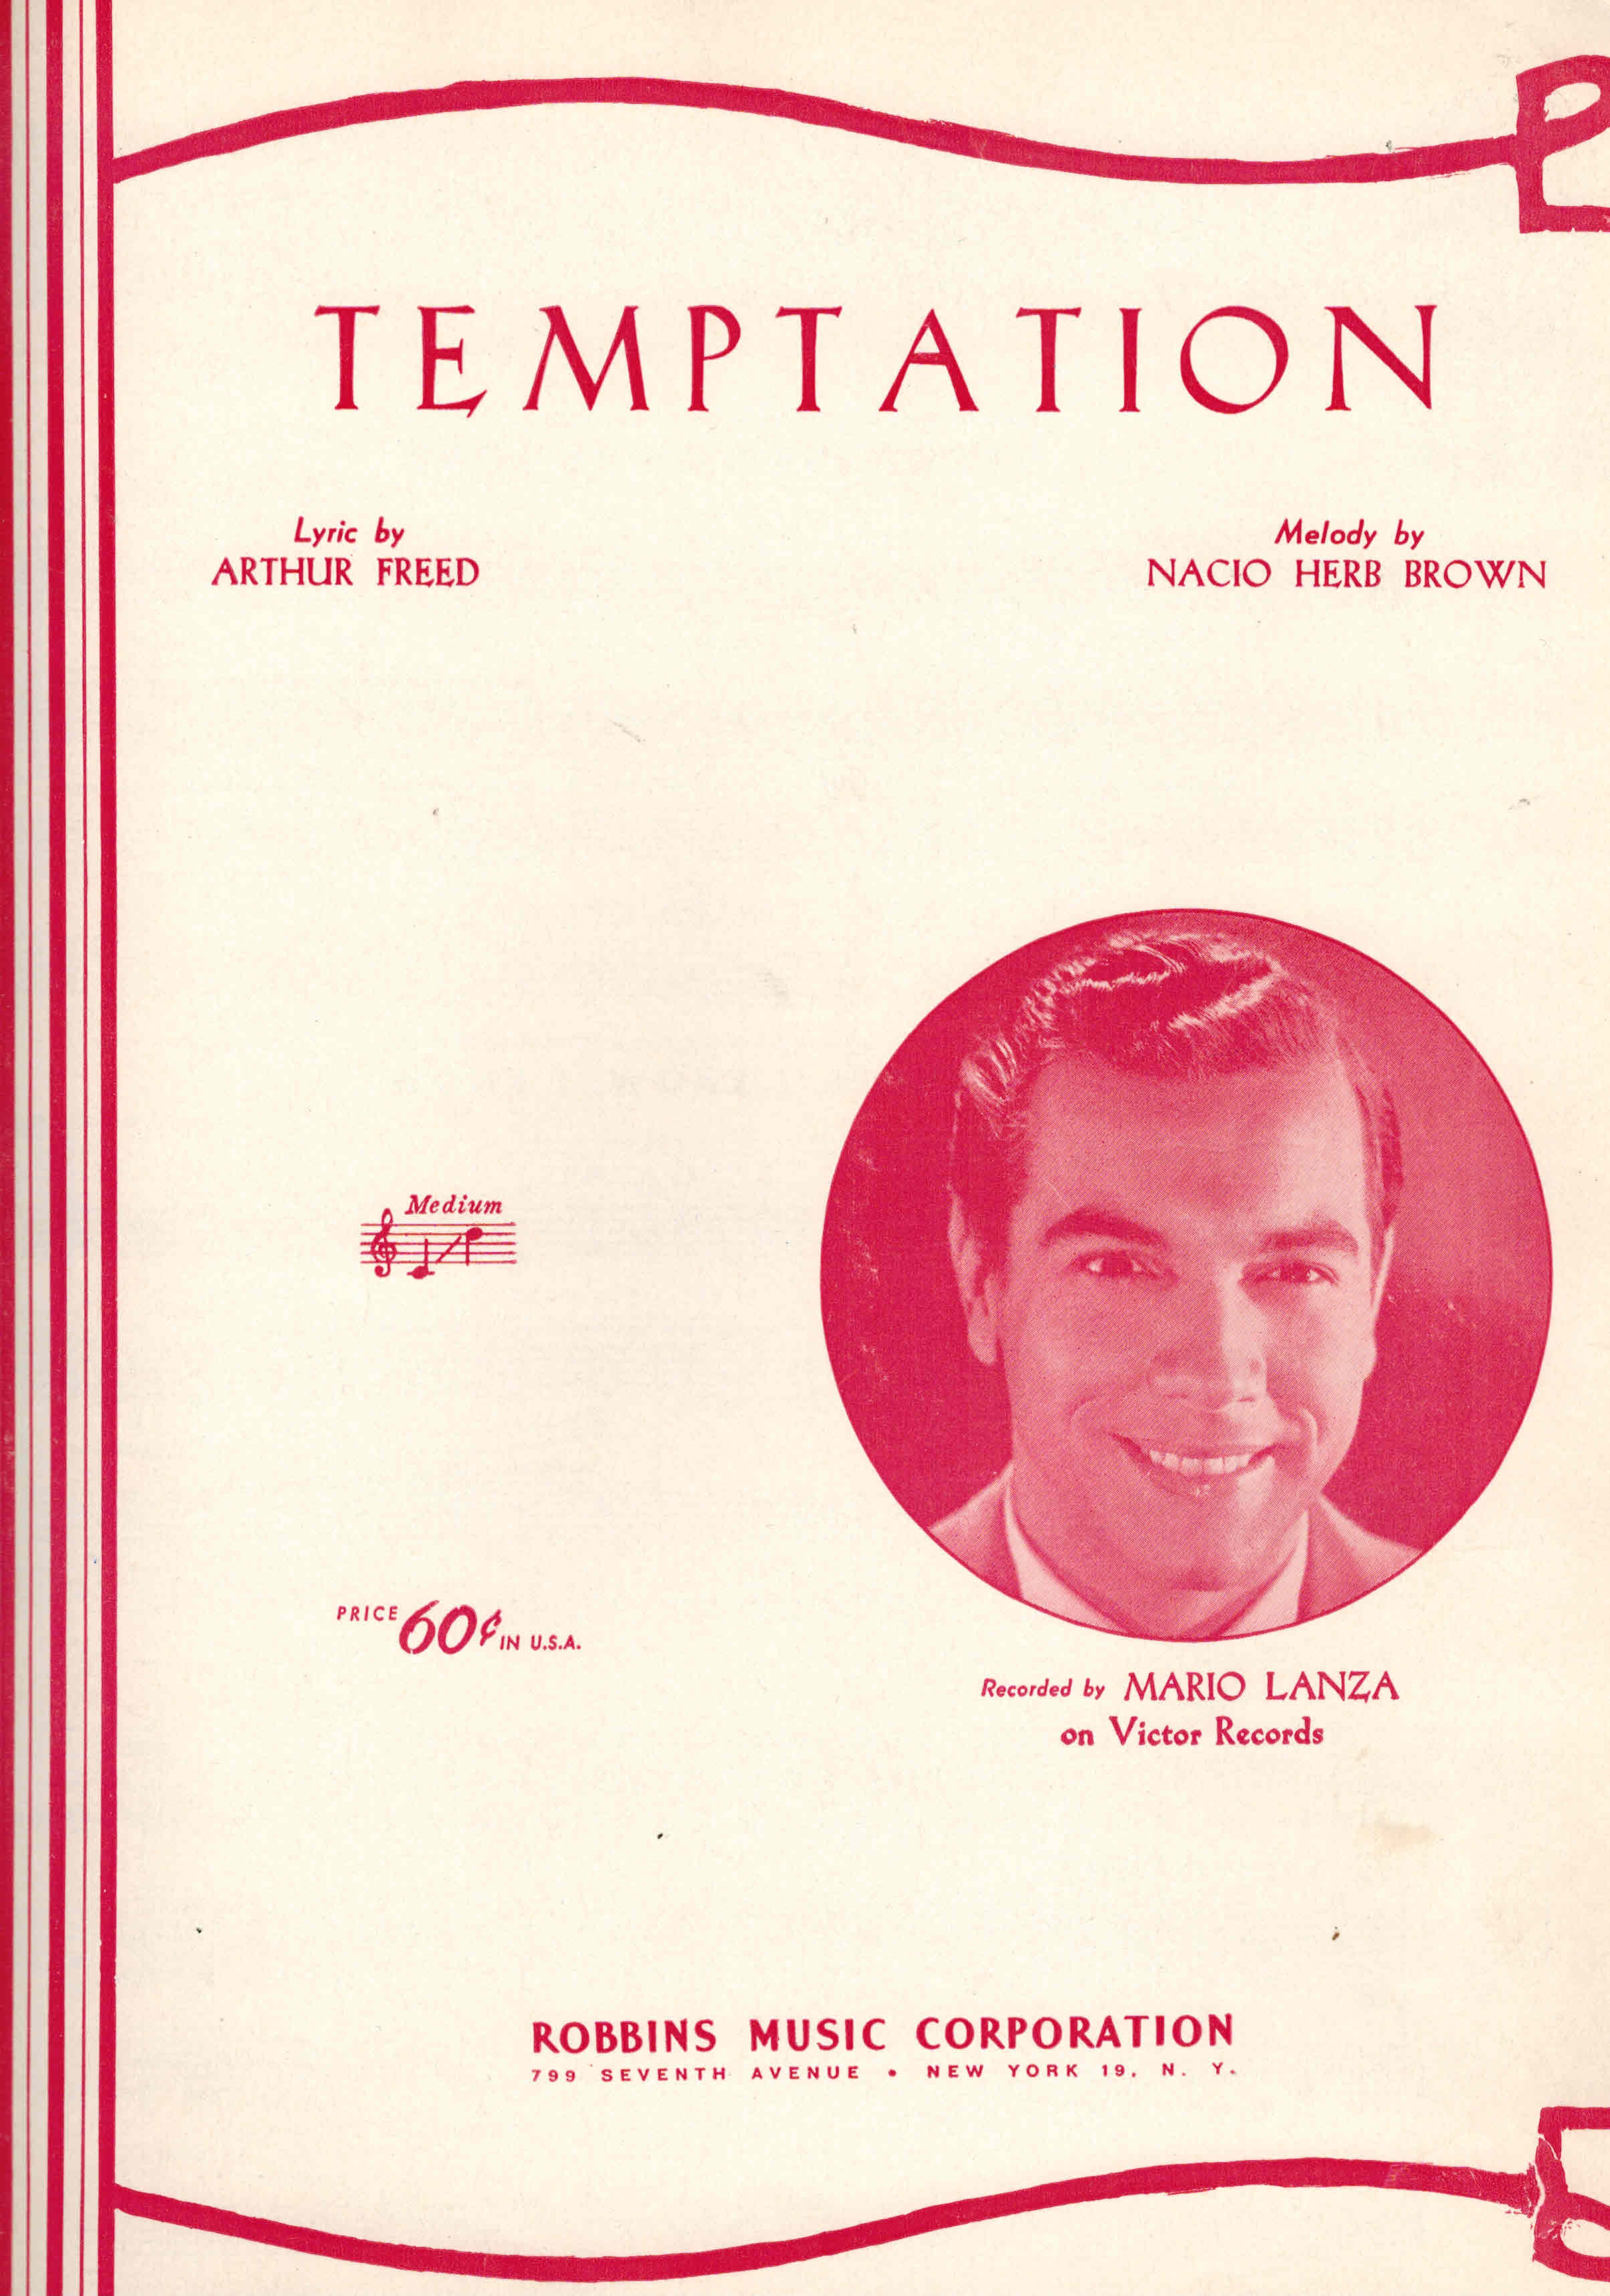 Image for Temptation - Sheet Music - Mario Lanza Cover